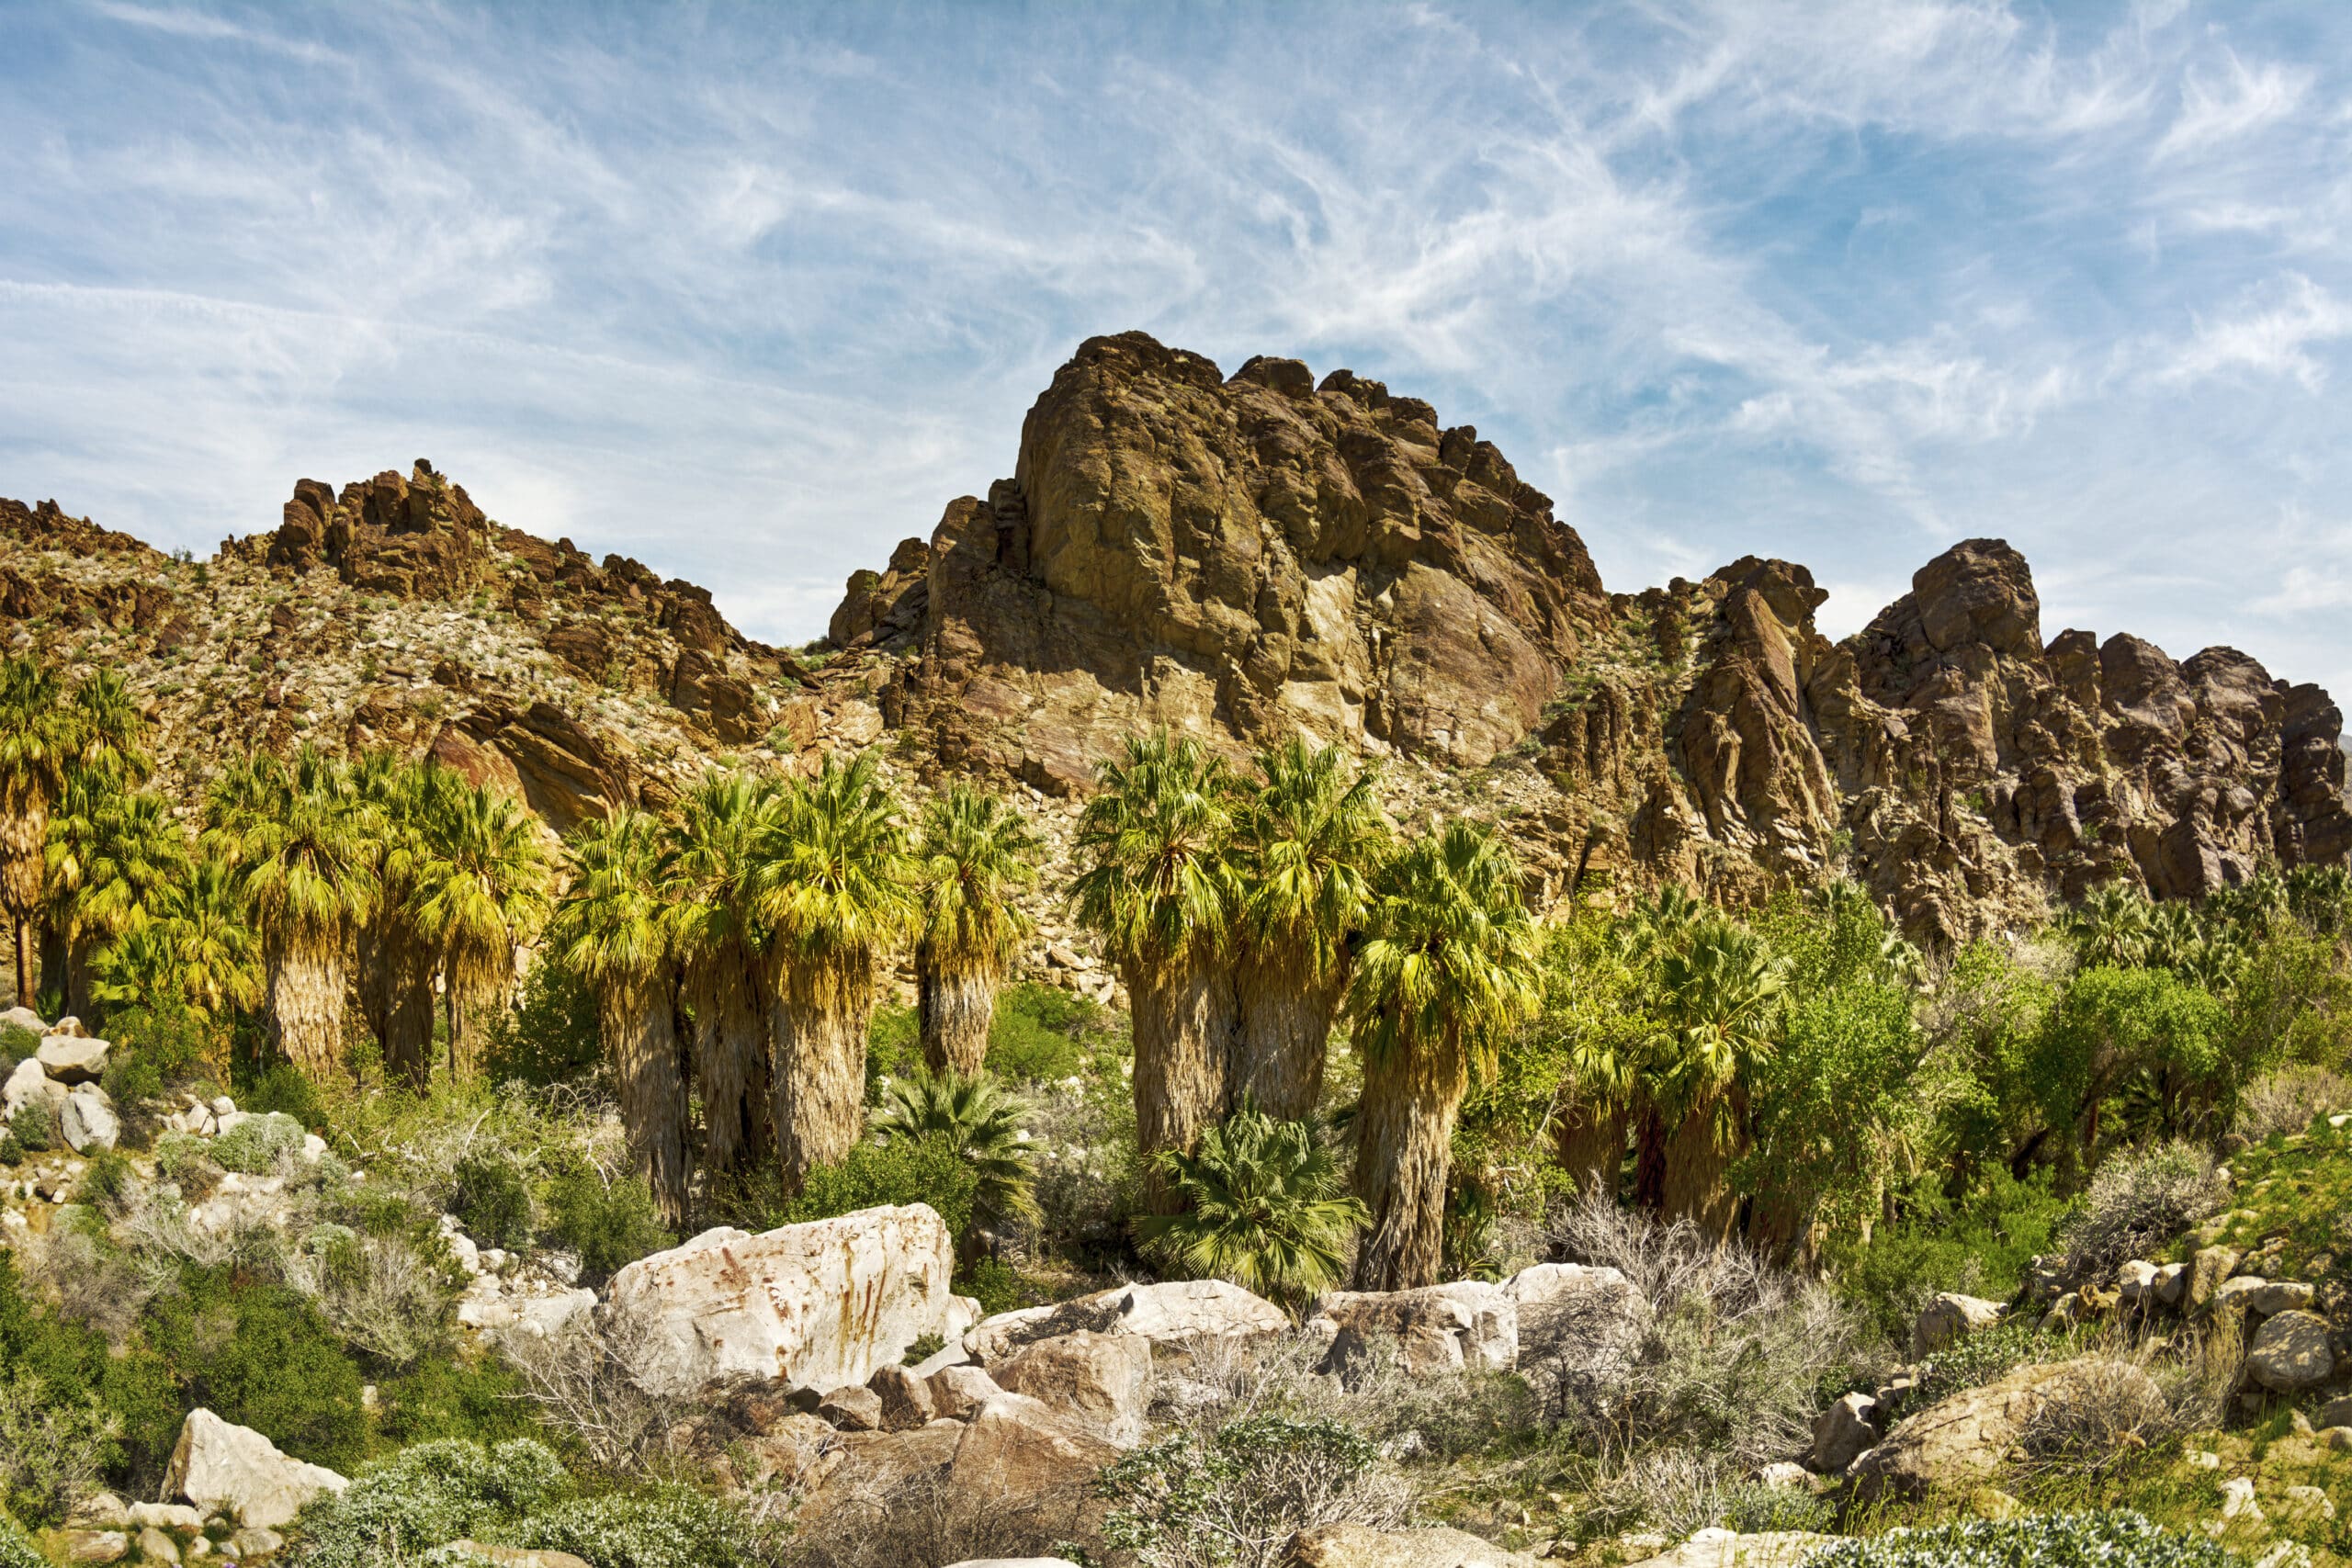 Scenic view of a rocky mountainside in Palm Springs framed with a row of palm trees and other natural foliage.